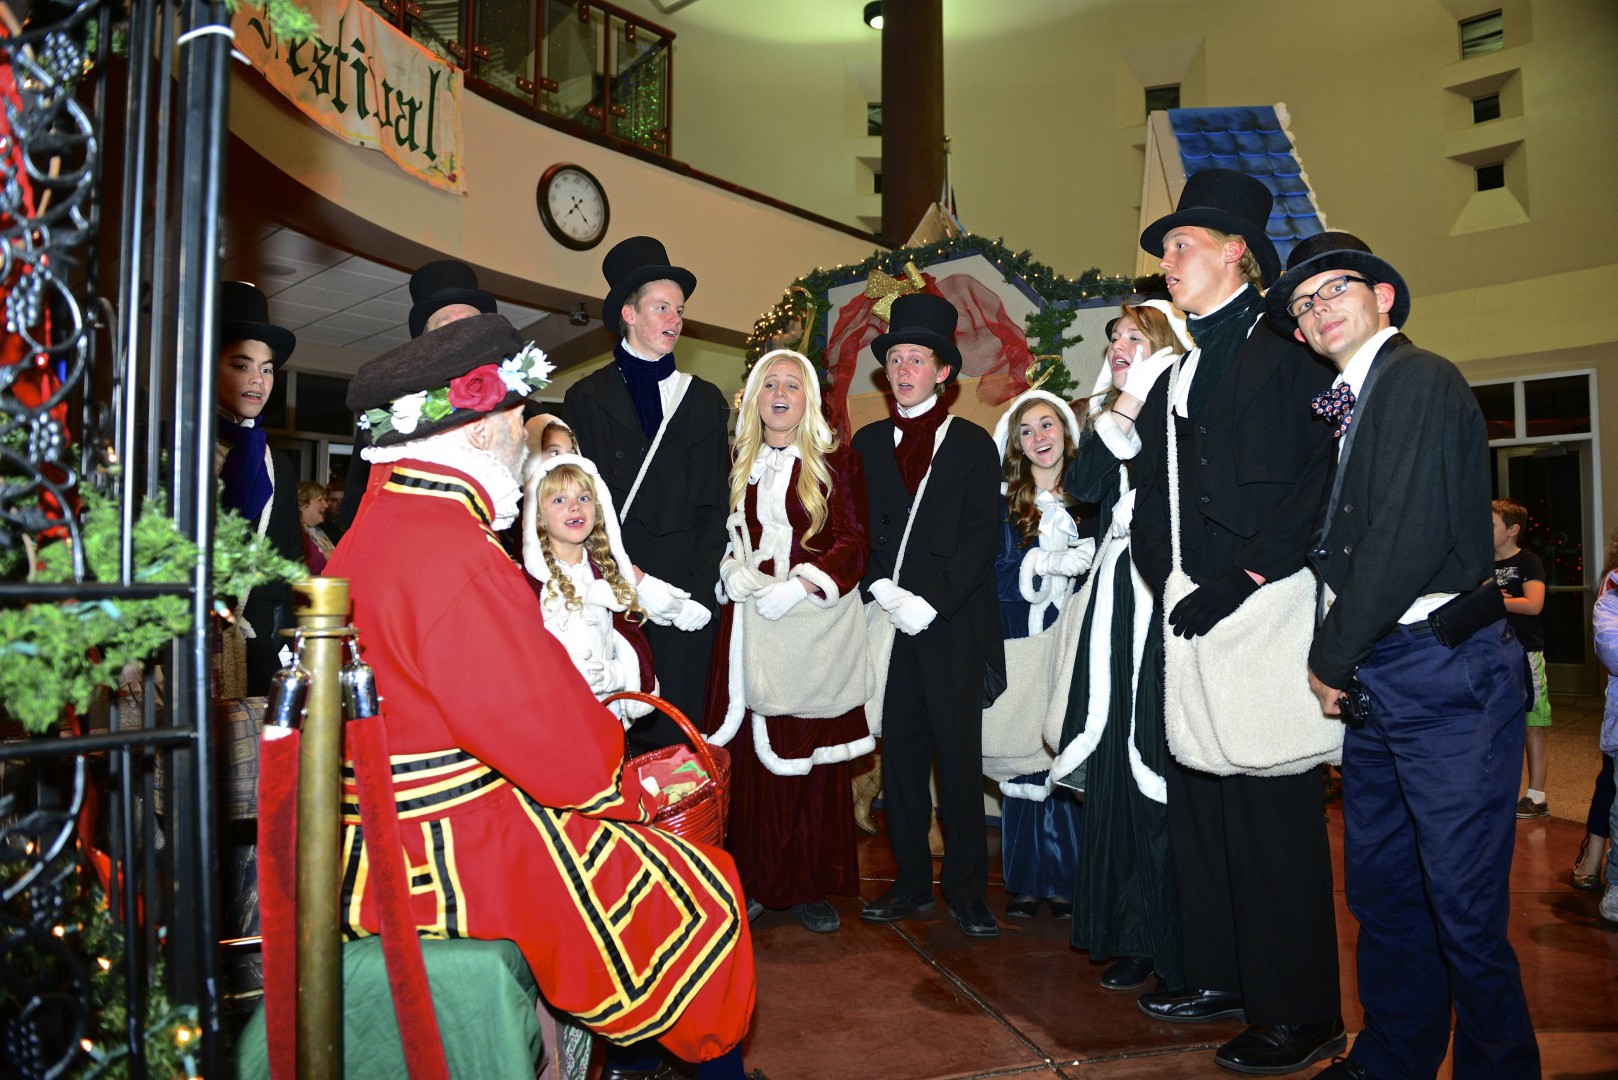 Photo Gallery Missed the Dickens’ Festival? Enjoy it here as if you